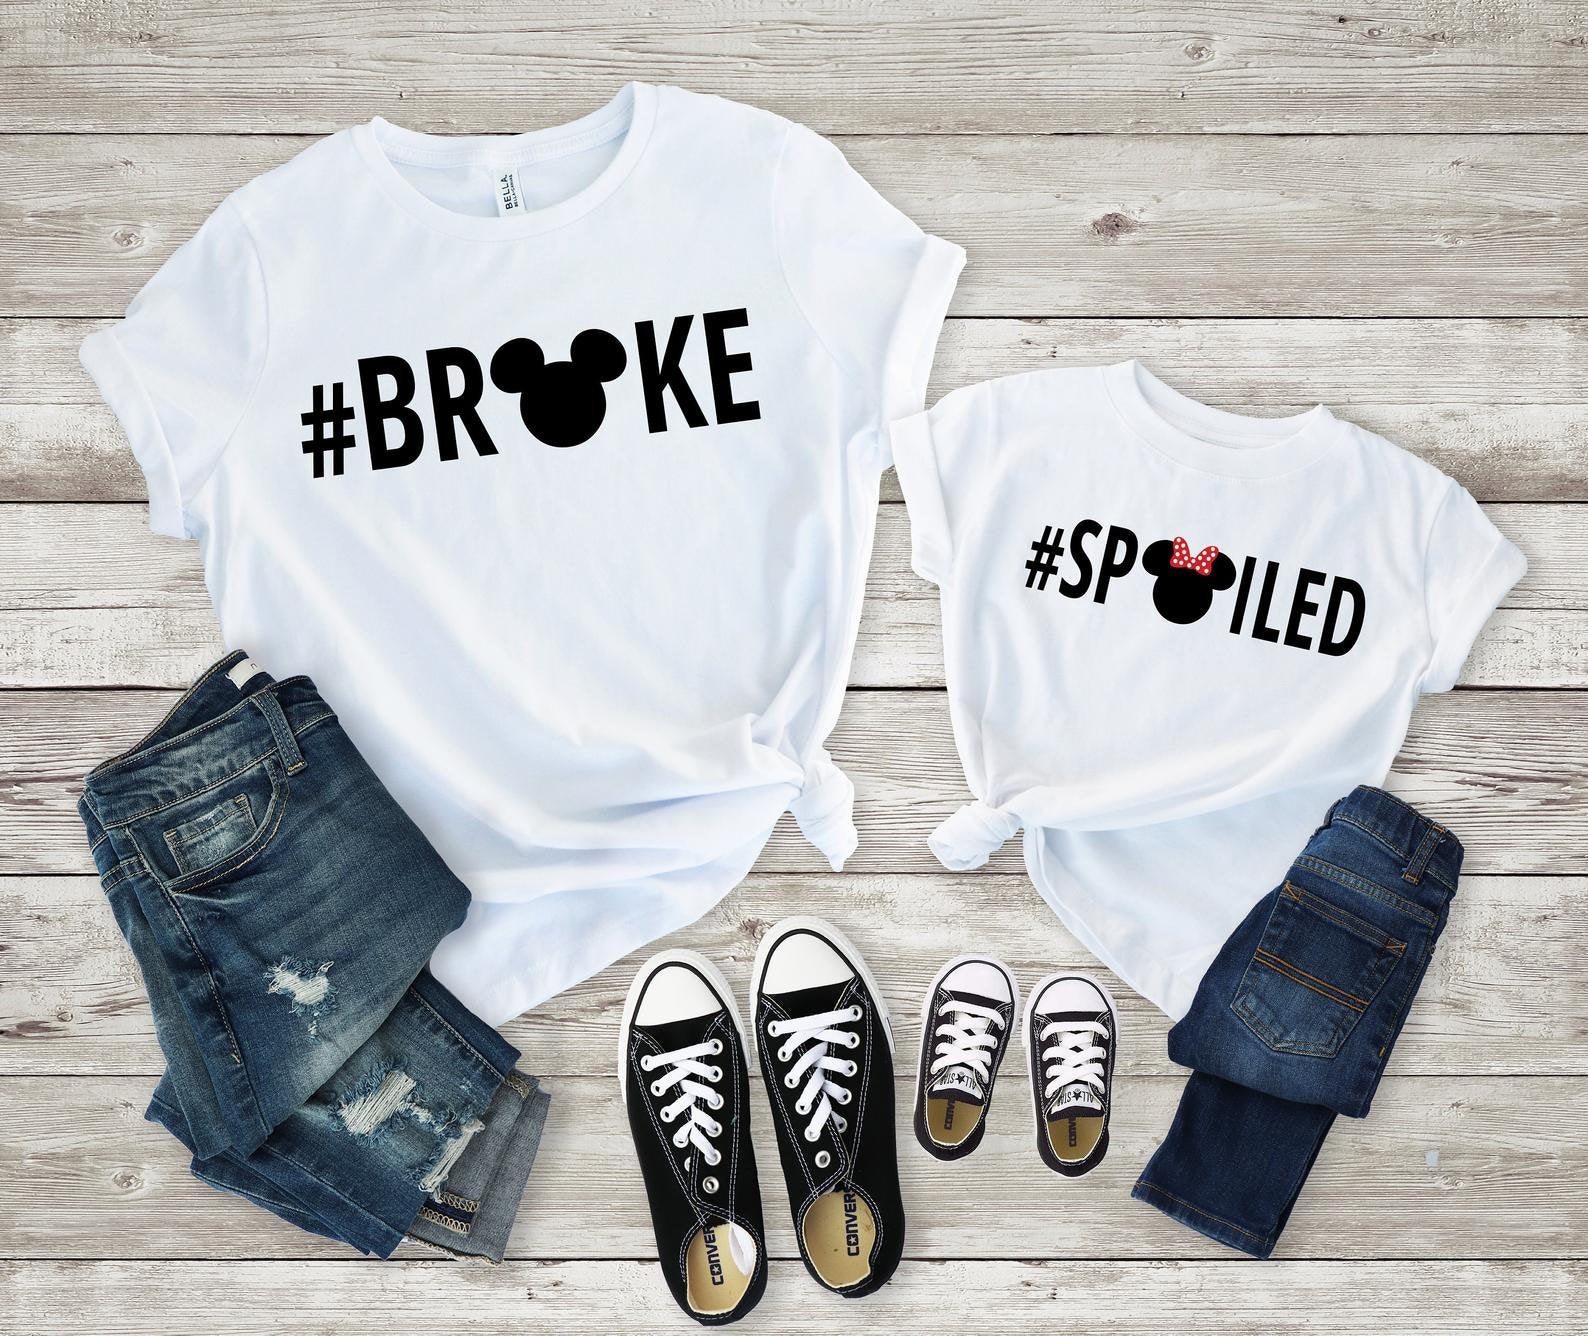 matching shirts for couples